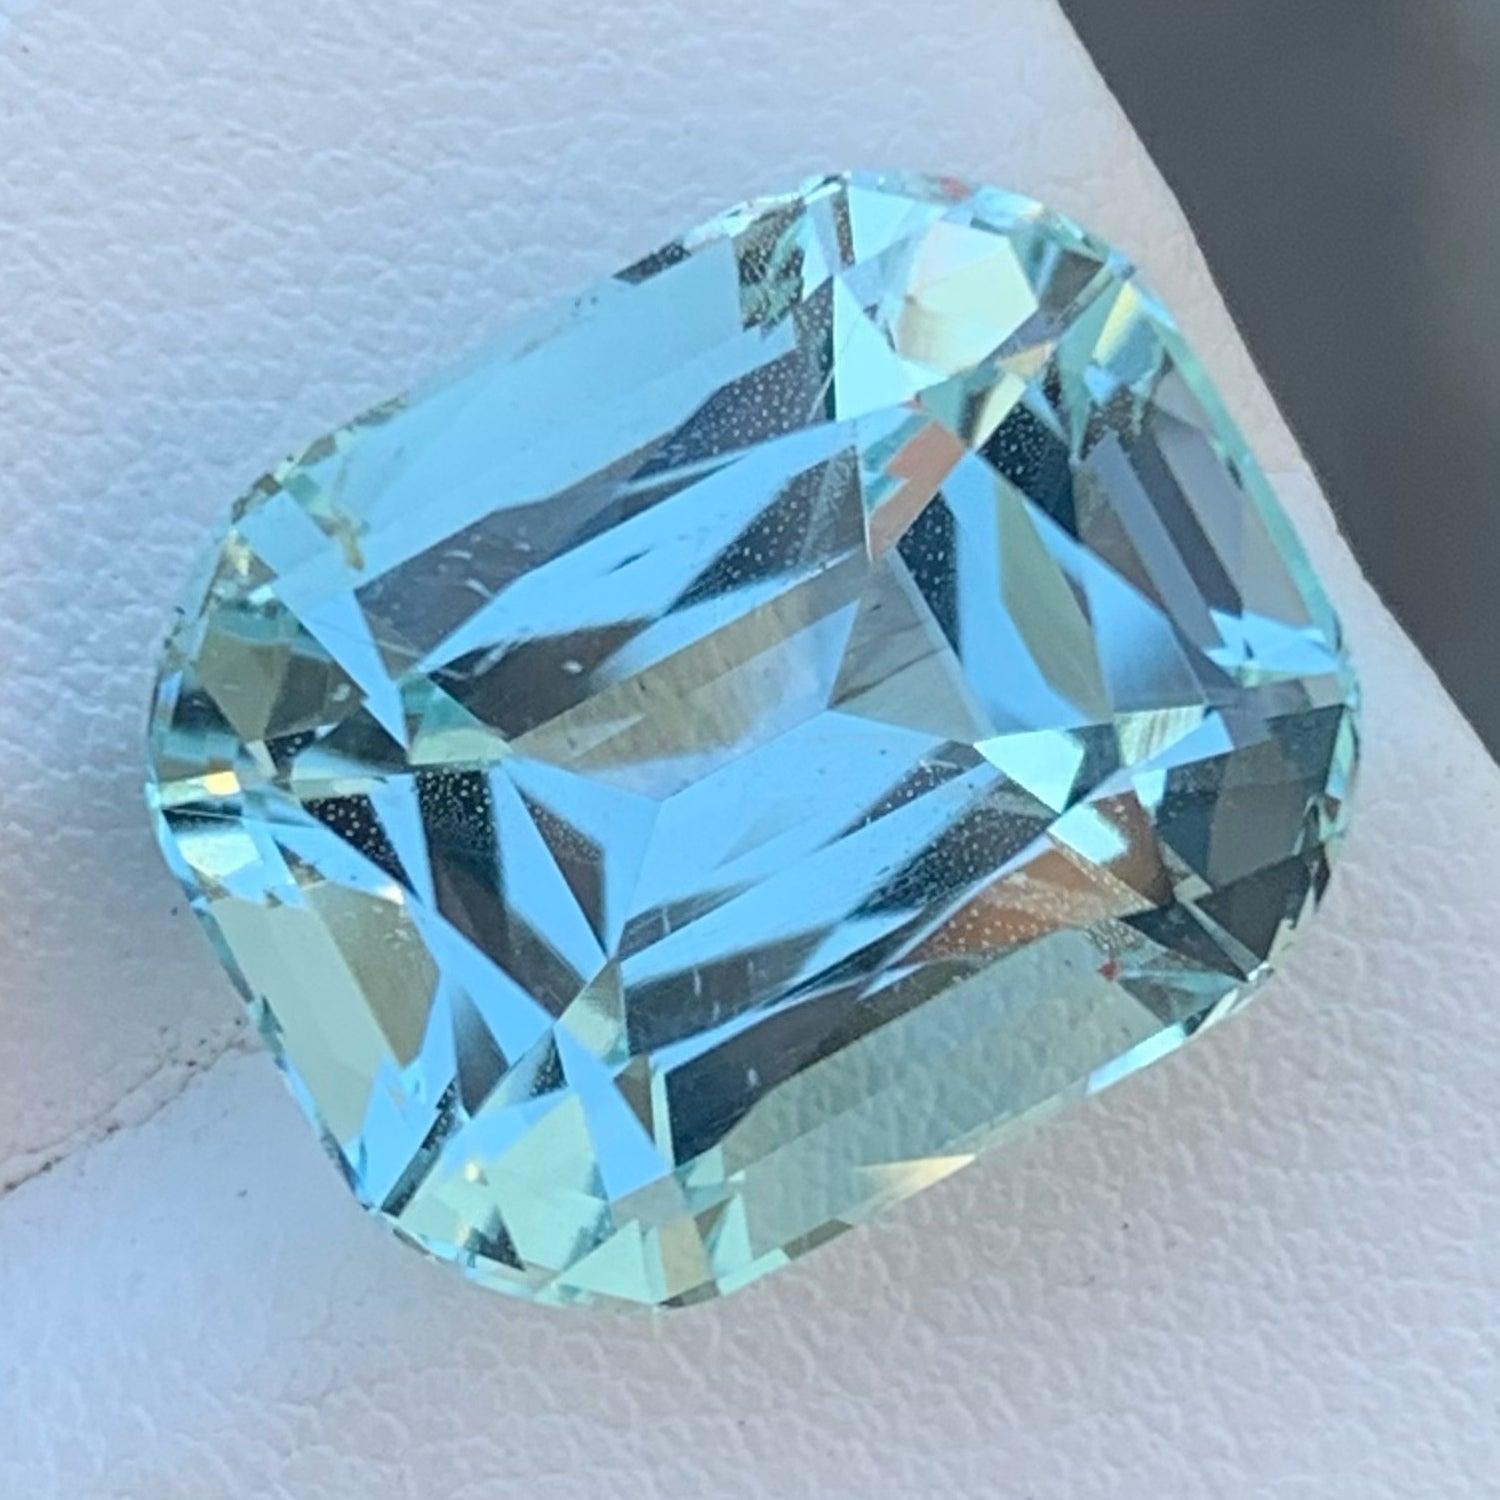 Shiny Natural Aquamarine stone, available for sale at wholesale price natural high quality, 16.50 Carats, Vvs Clarity Loose Aquamarine from Pakistan.

Product Information:
GEMSTONE NAME: Shiny Natural Aquamarine Gemstone
WEIGHT: 16.50